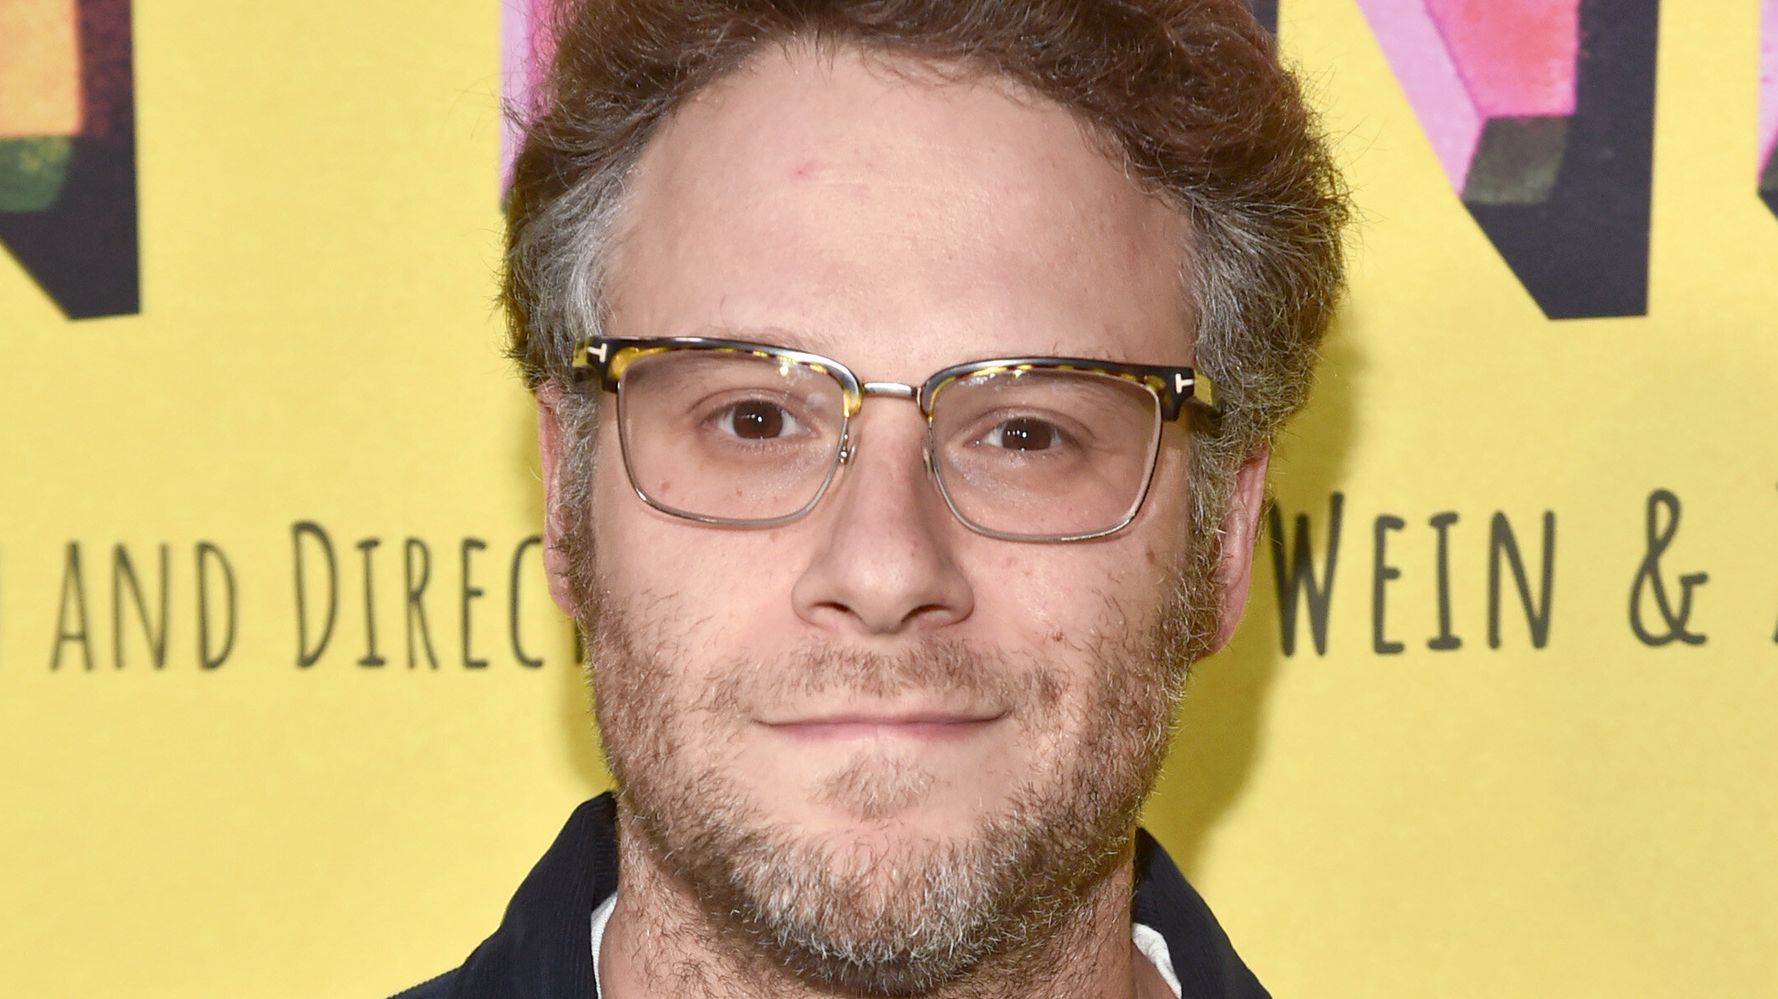 Seth Rogen Responds To 'Very Funny' TikTok Asking If He's Been Kidnapped